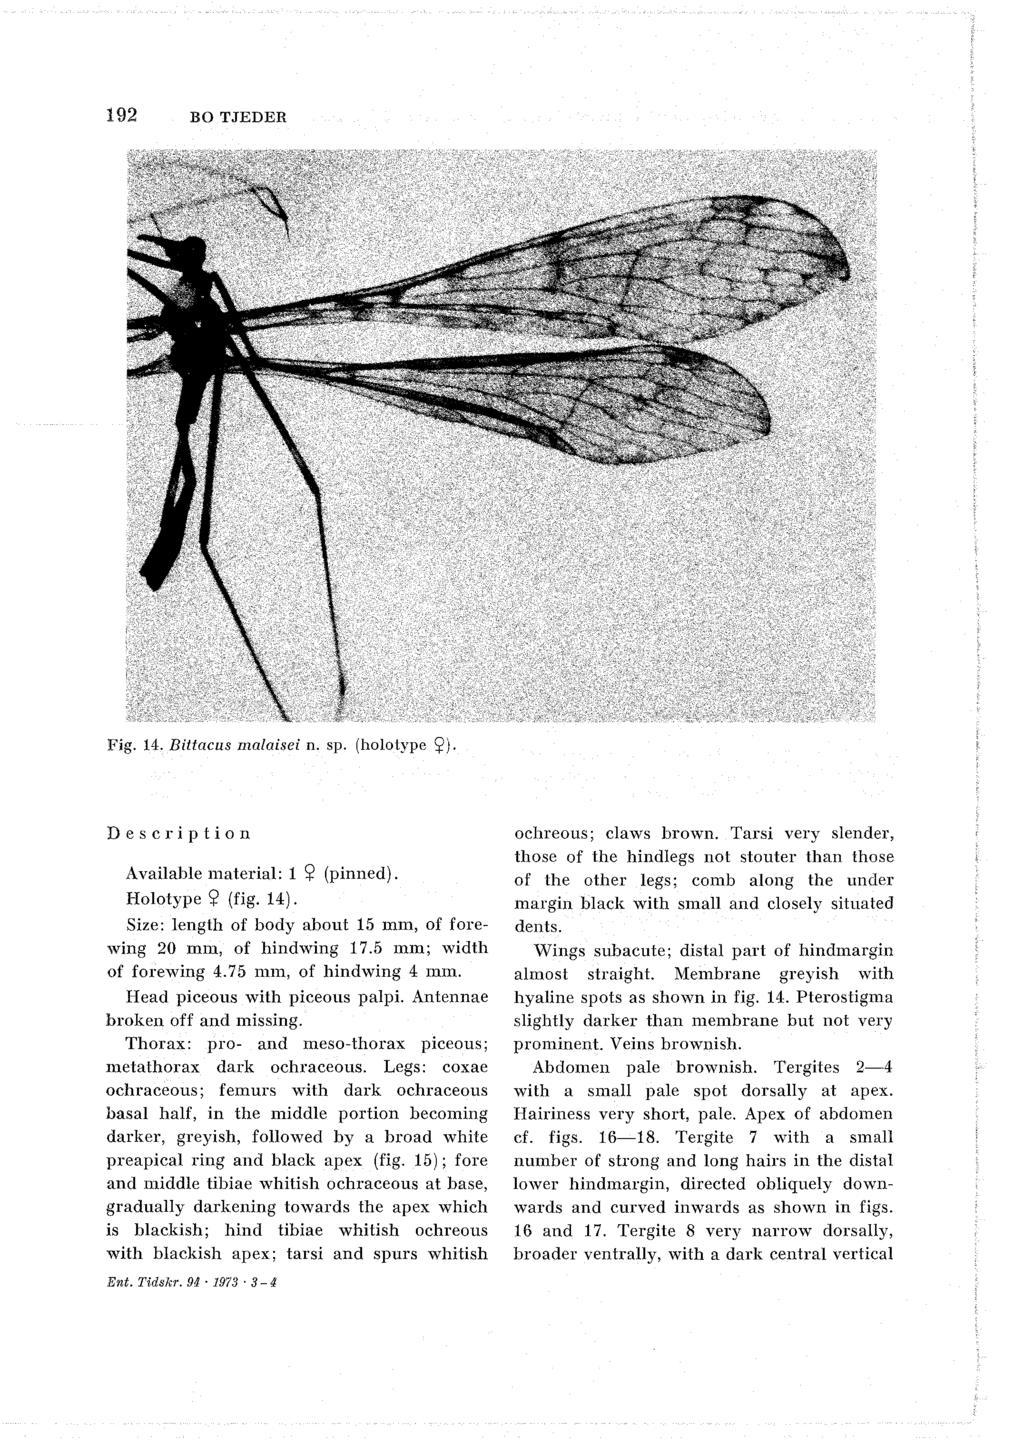 192 BO TJEDER Fig. 14. Bittacus inalaisei n. sp. (holo ype 9). Description Available material: 1 2 (pinned). Holotype 9 (fig. 14). Size: length of body about 15 mm, of forewing 20 mm, of hindwing 17.